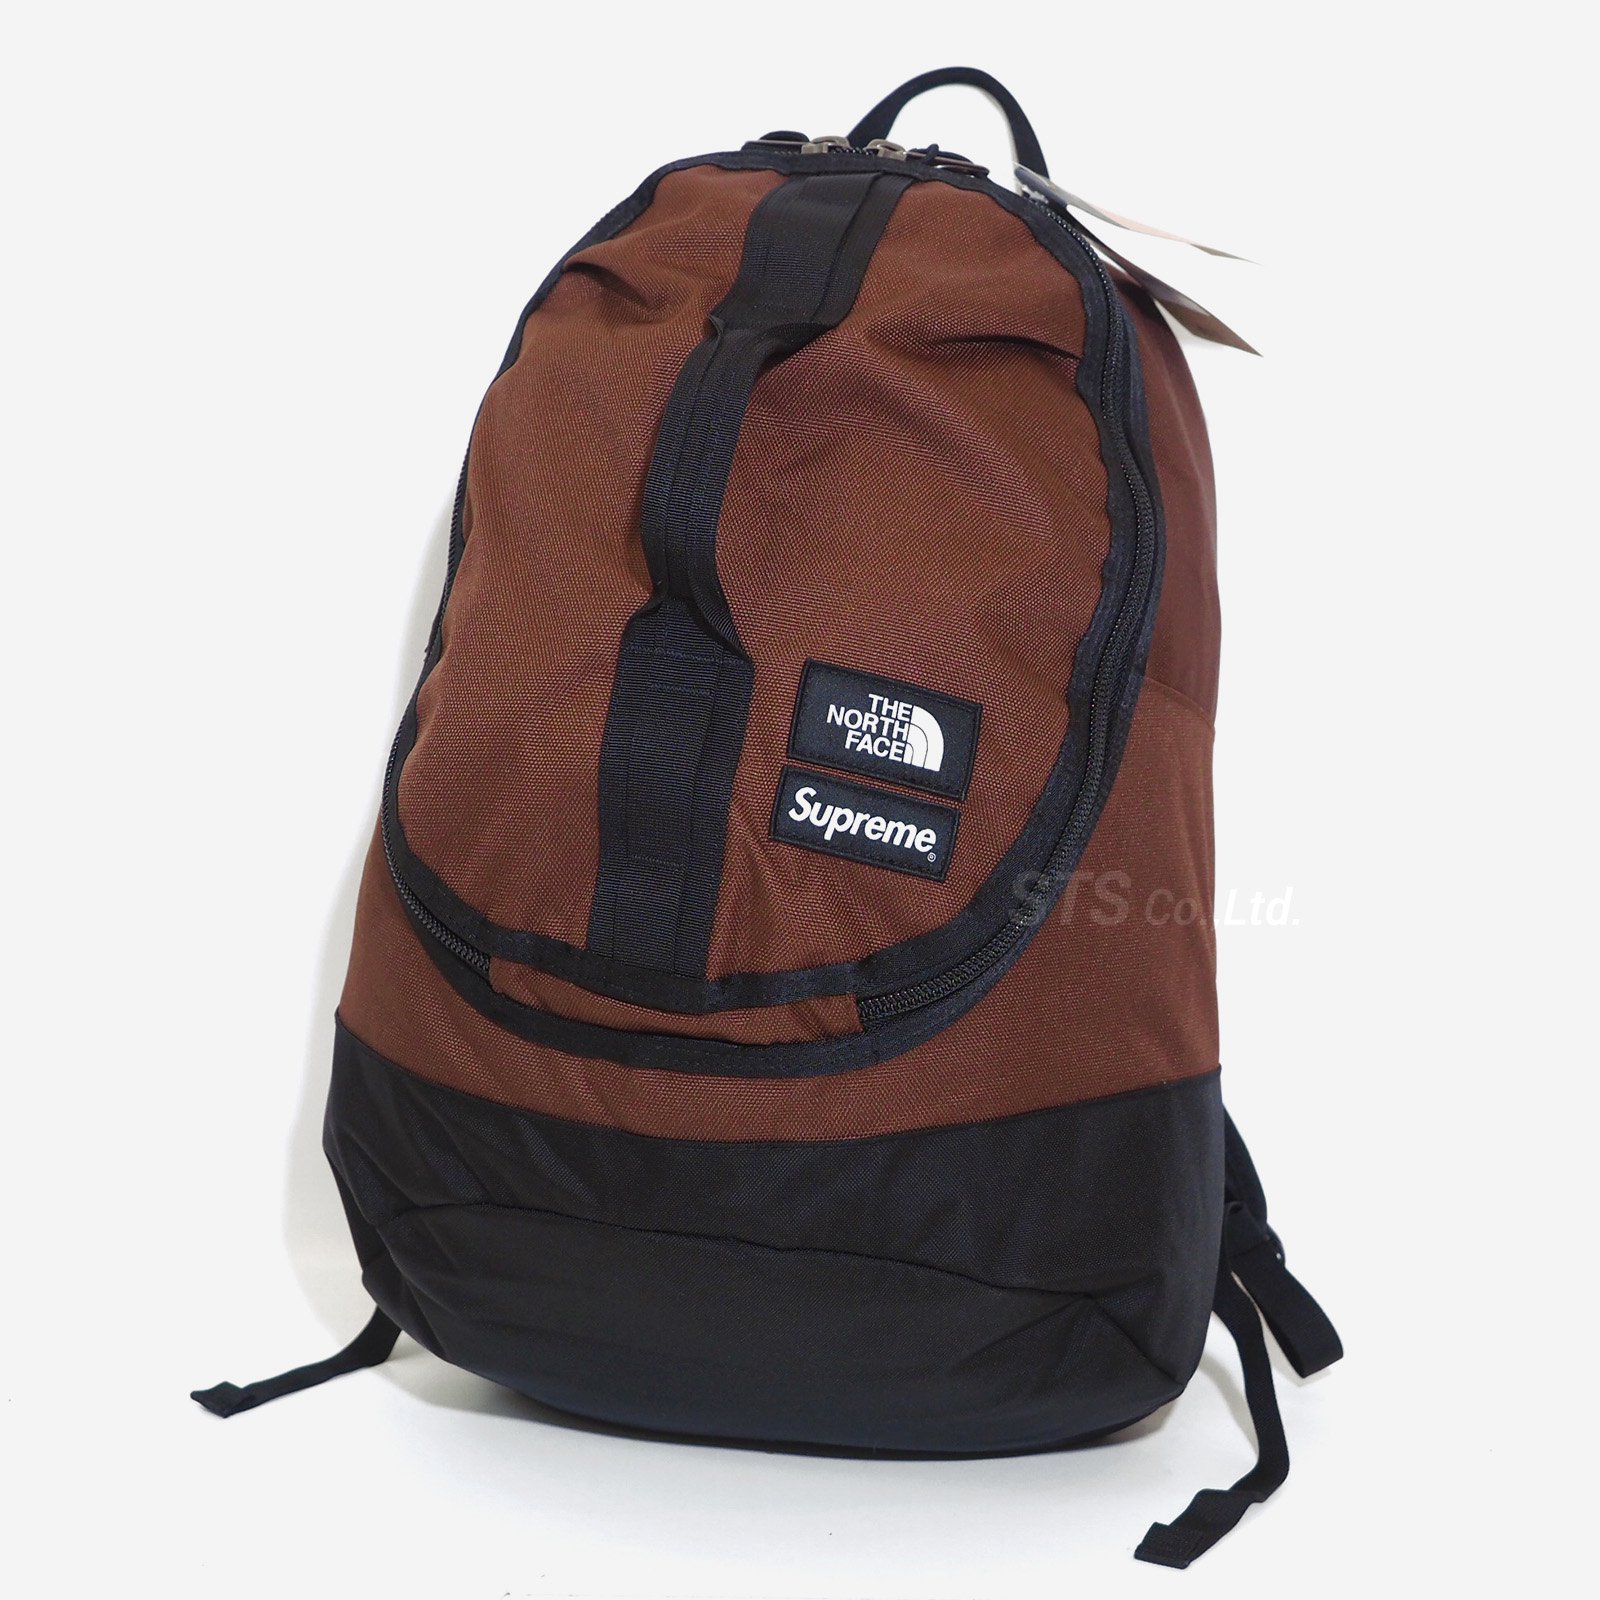 Supreme The NorthFace SteepTech Backpack